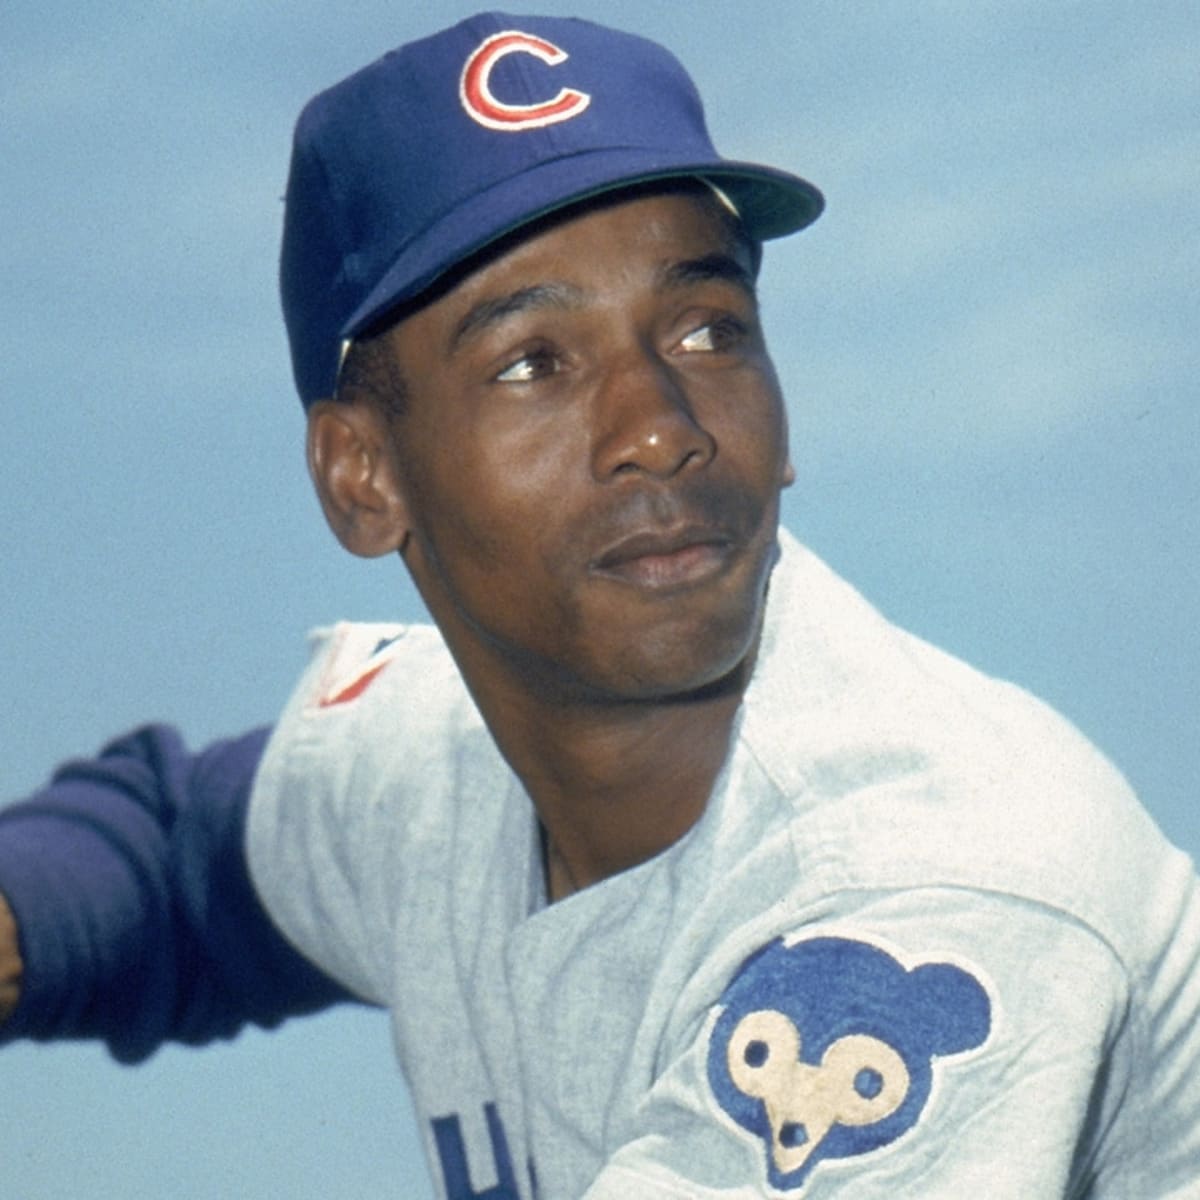 For Ernie Banks, even today the numbers don't lie